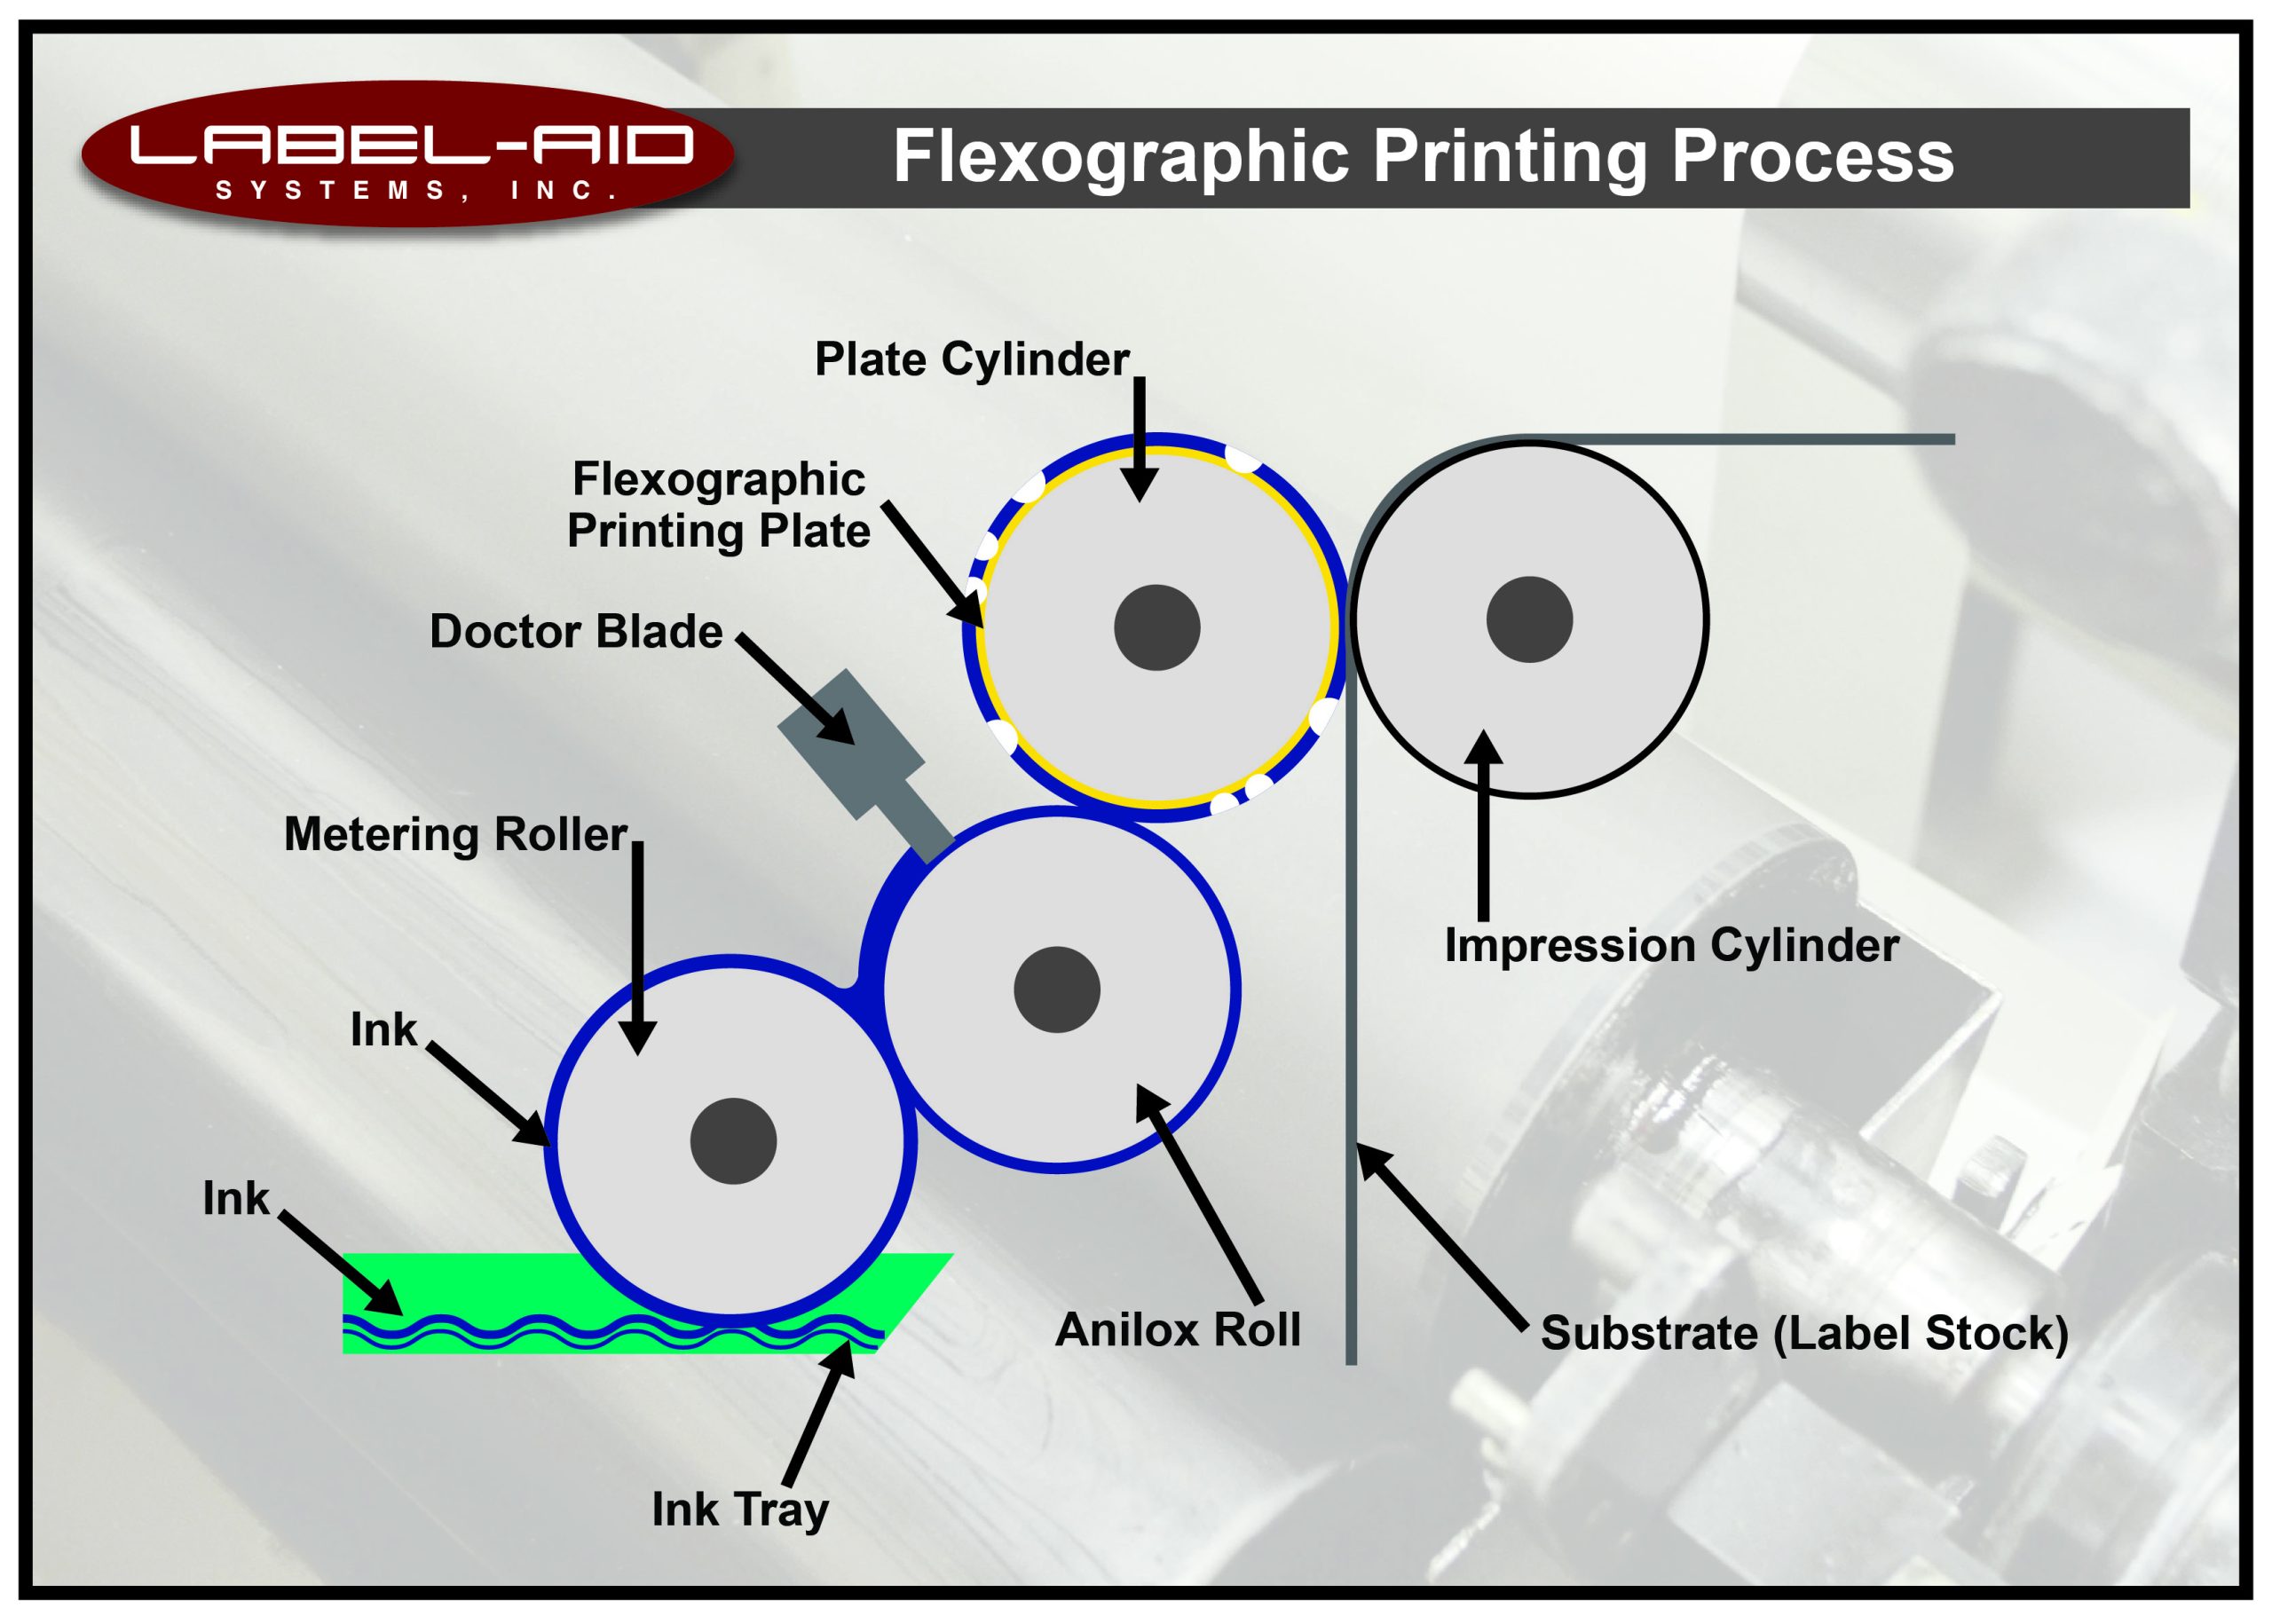 Custom Flexographic Labels - Flexo Label Printing | Label-Aid Systems, Inc.